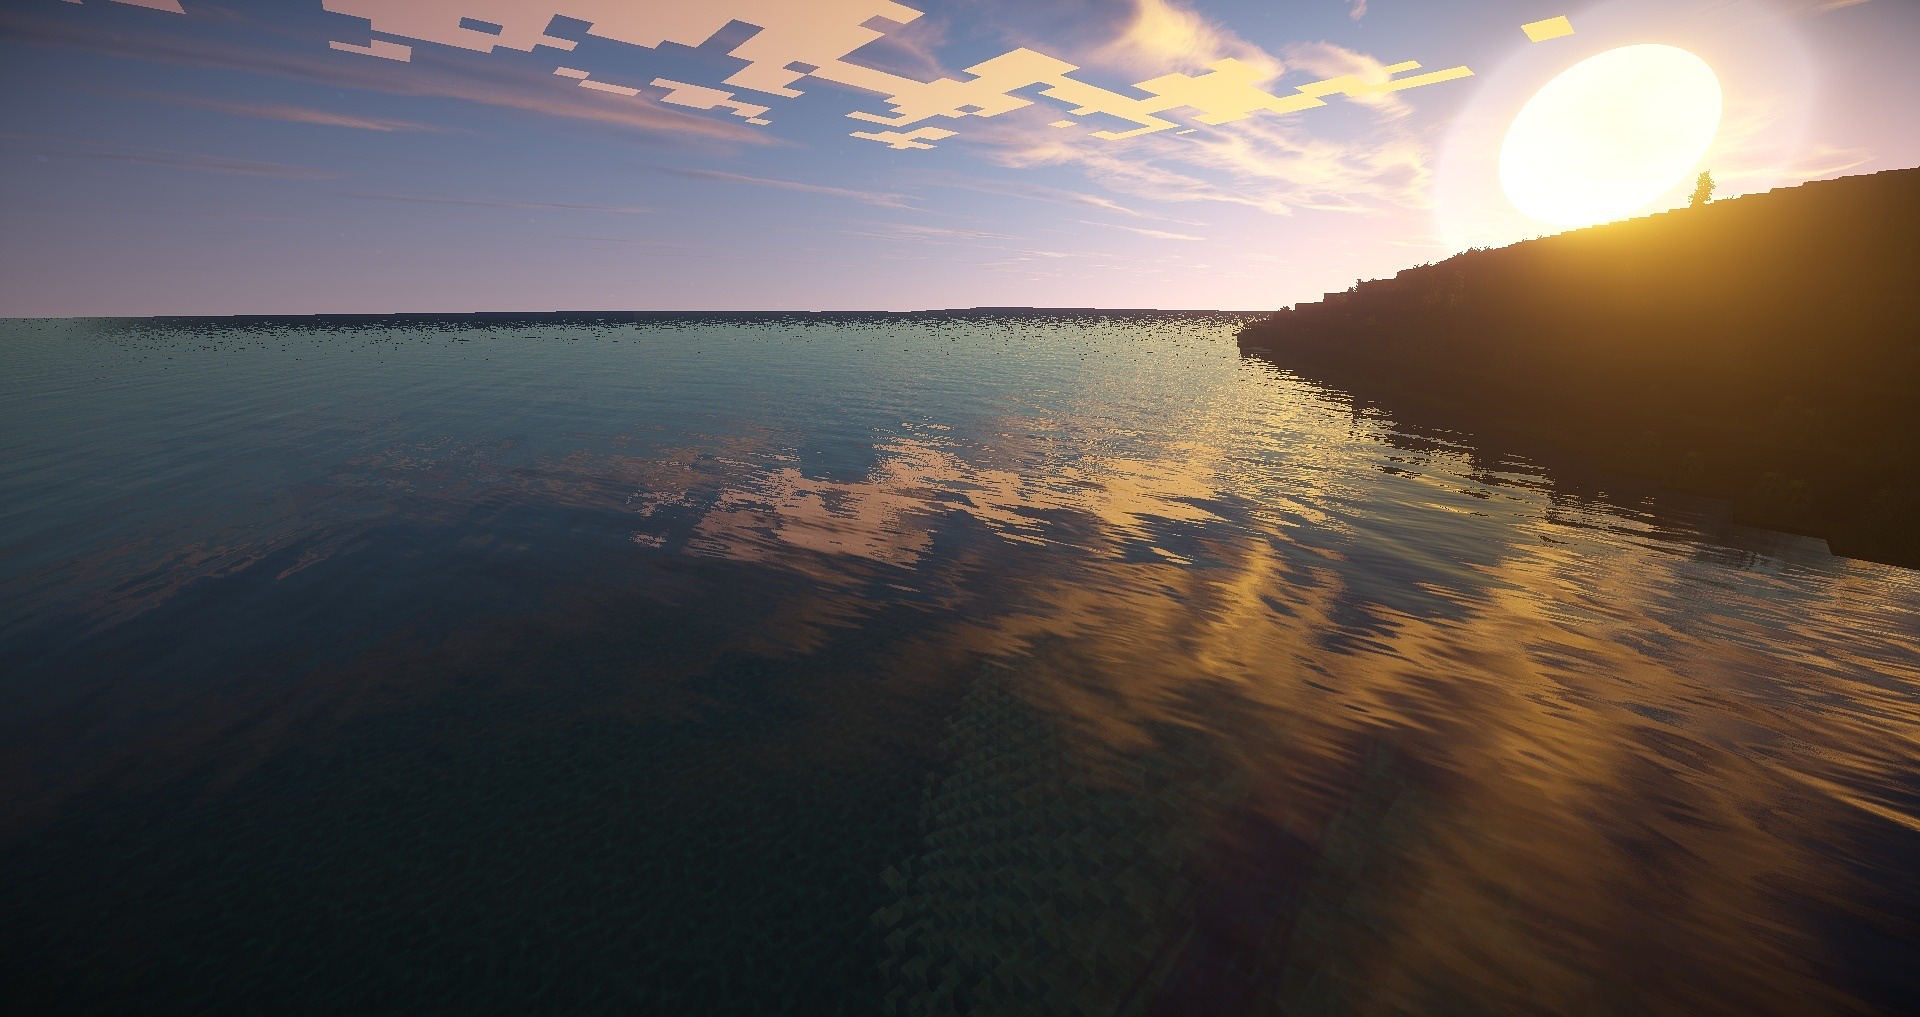 Installing Shaders and High-Quality Textures in Minecraft: A Comprehensive Guide